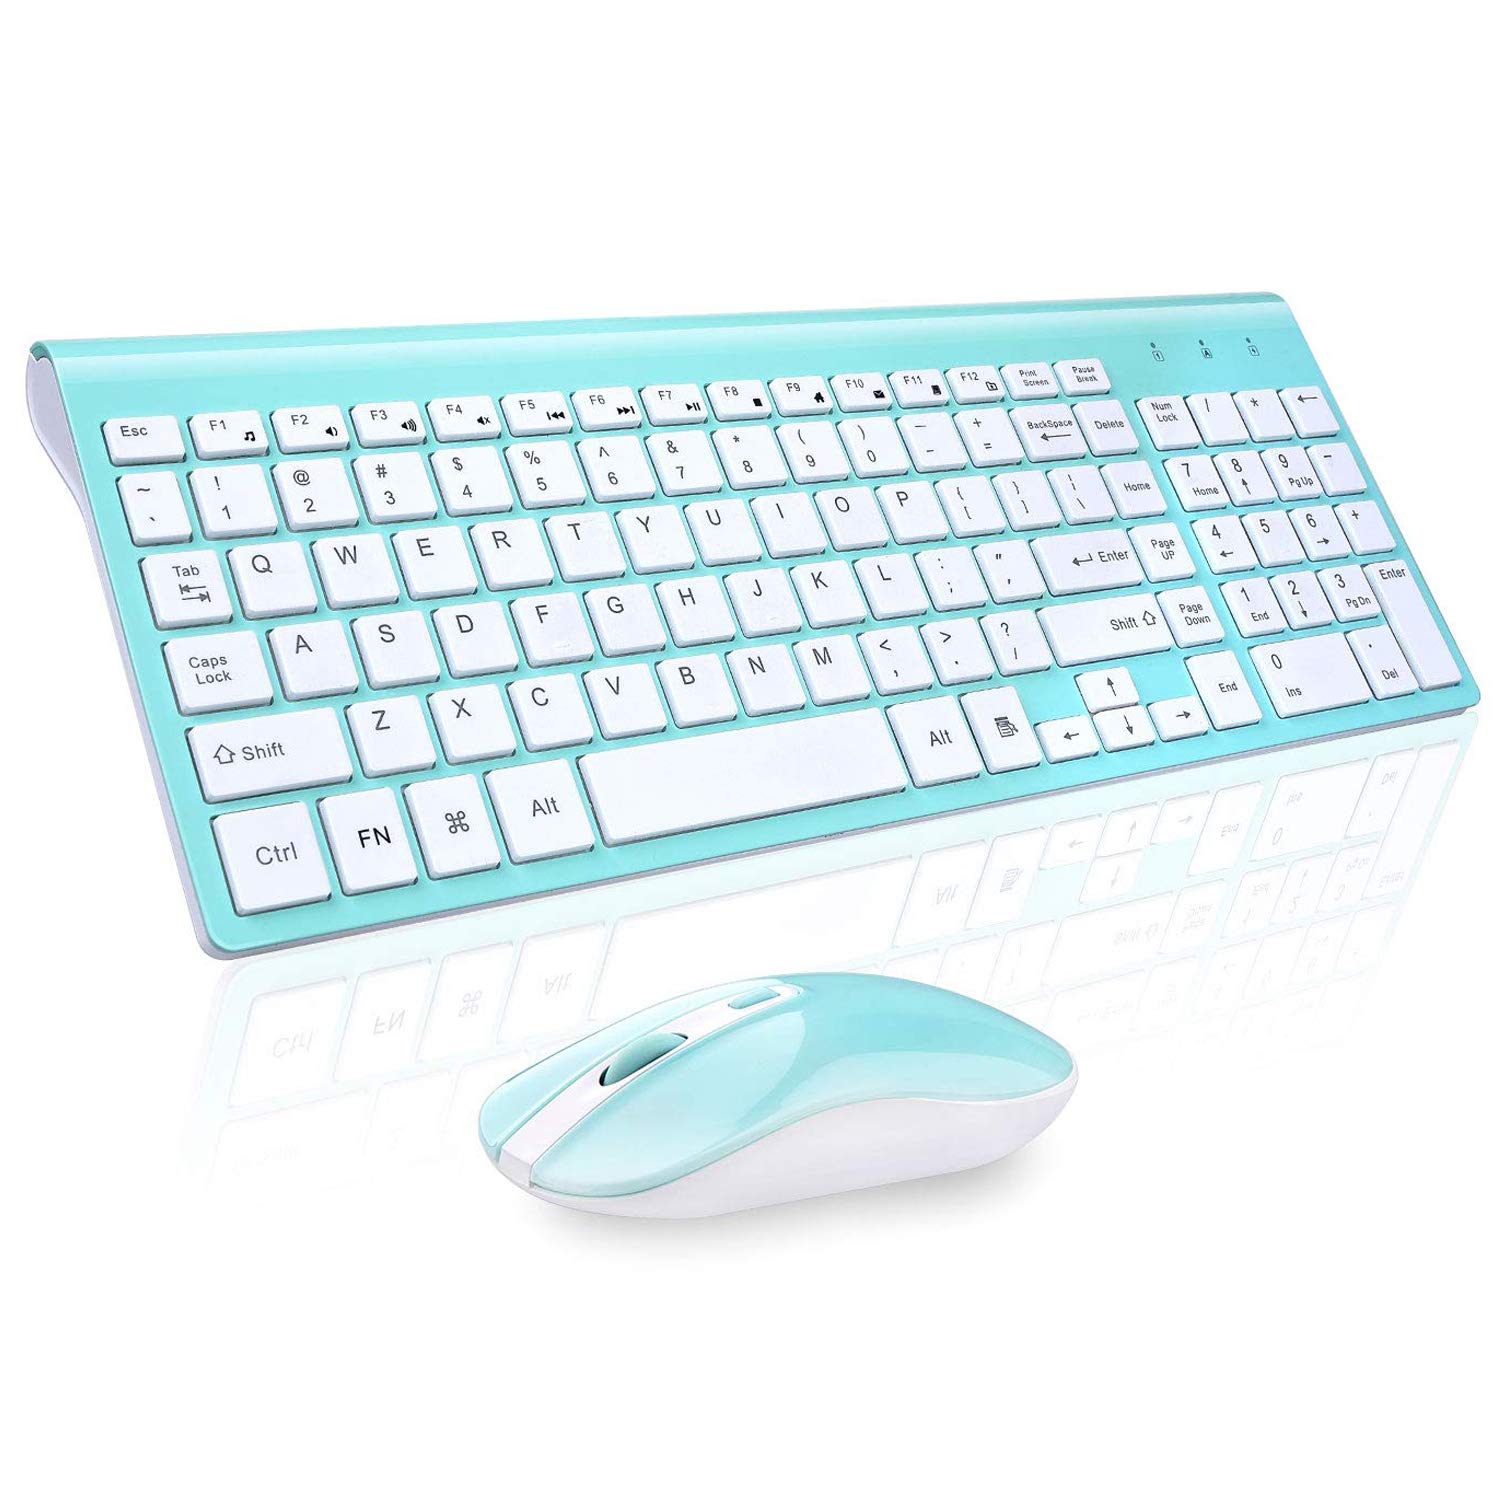 Cimetech Compact Full Size Wireless Keyboard and Mouse Set